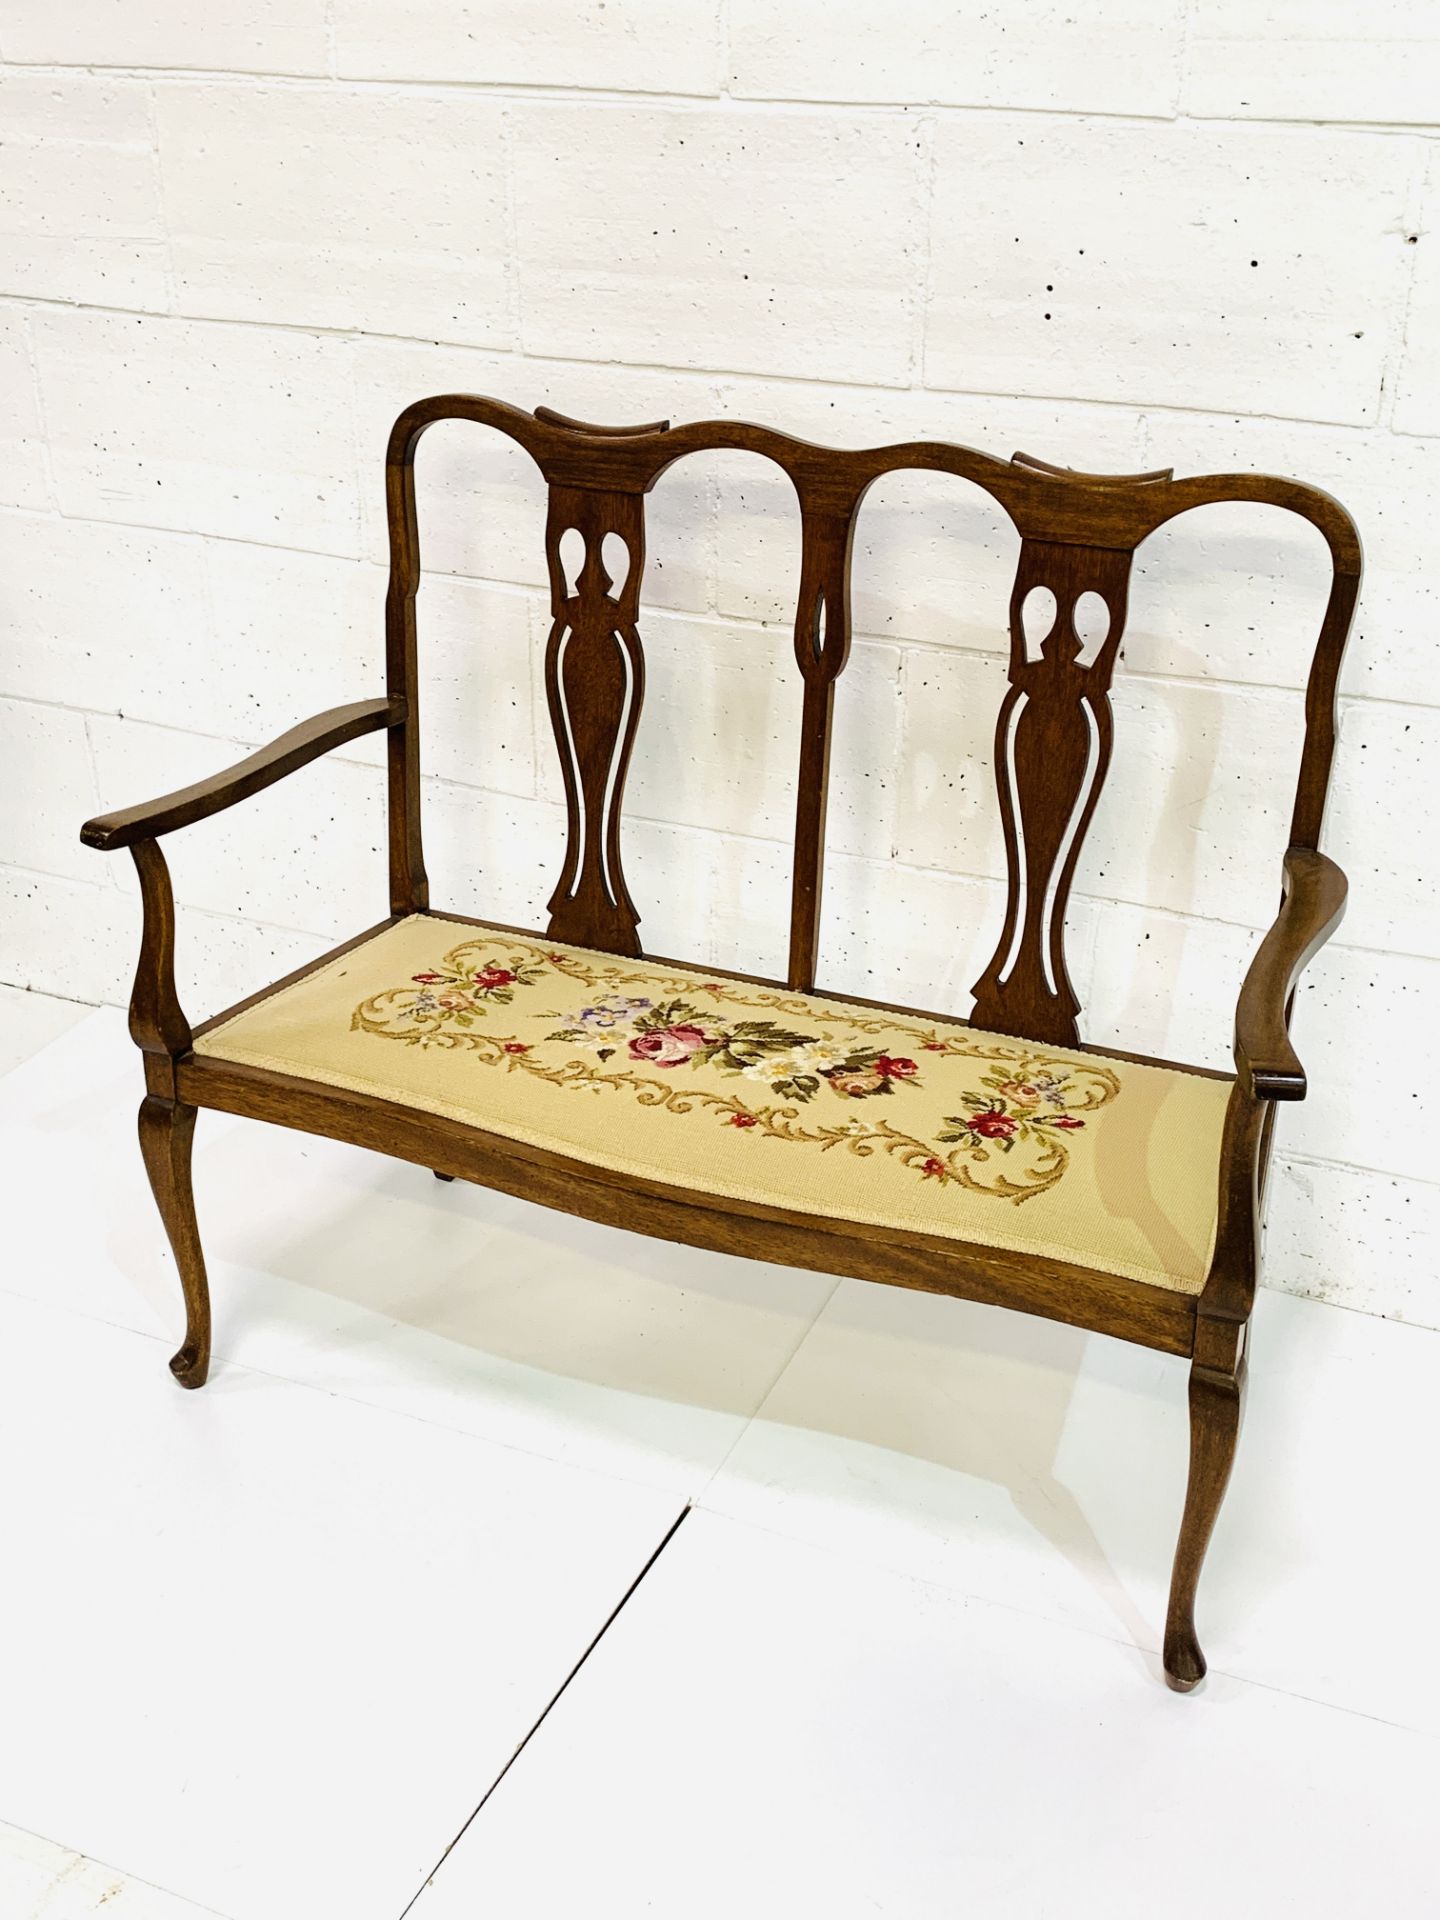 Mahogany framed two seat settle - Image 2 of 3